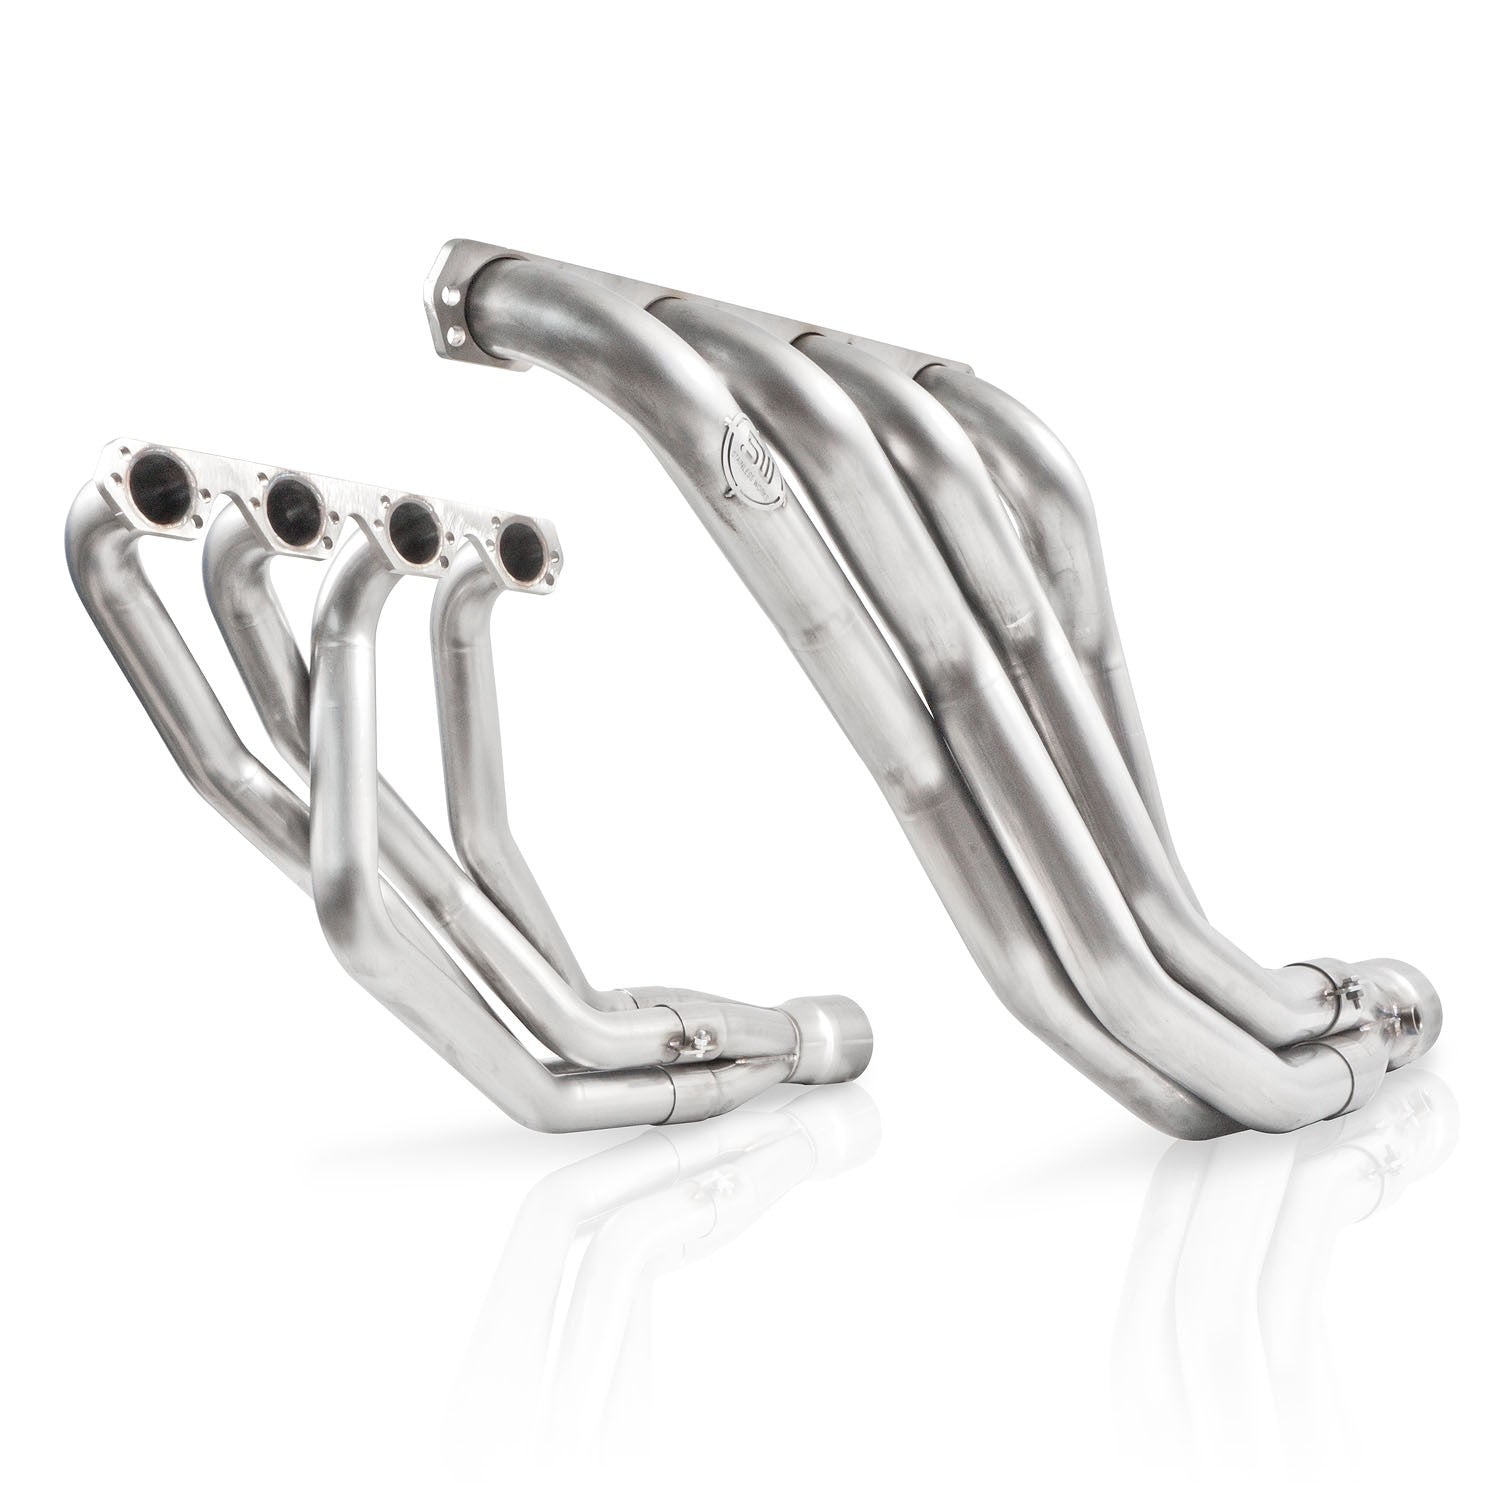 Stainless Works Ford Mustang Foxbody 1979-93 Headers FOXHP2